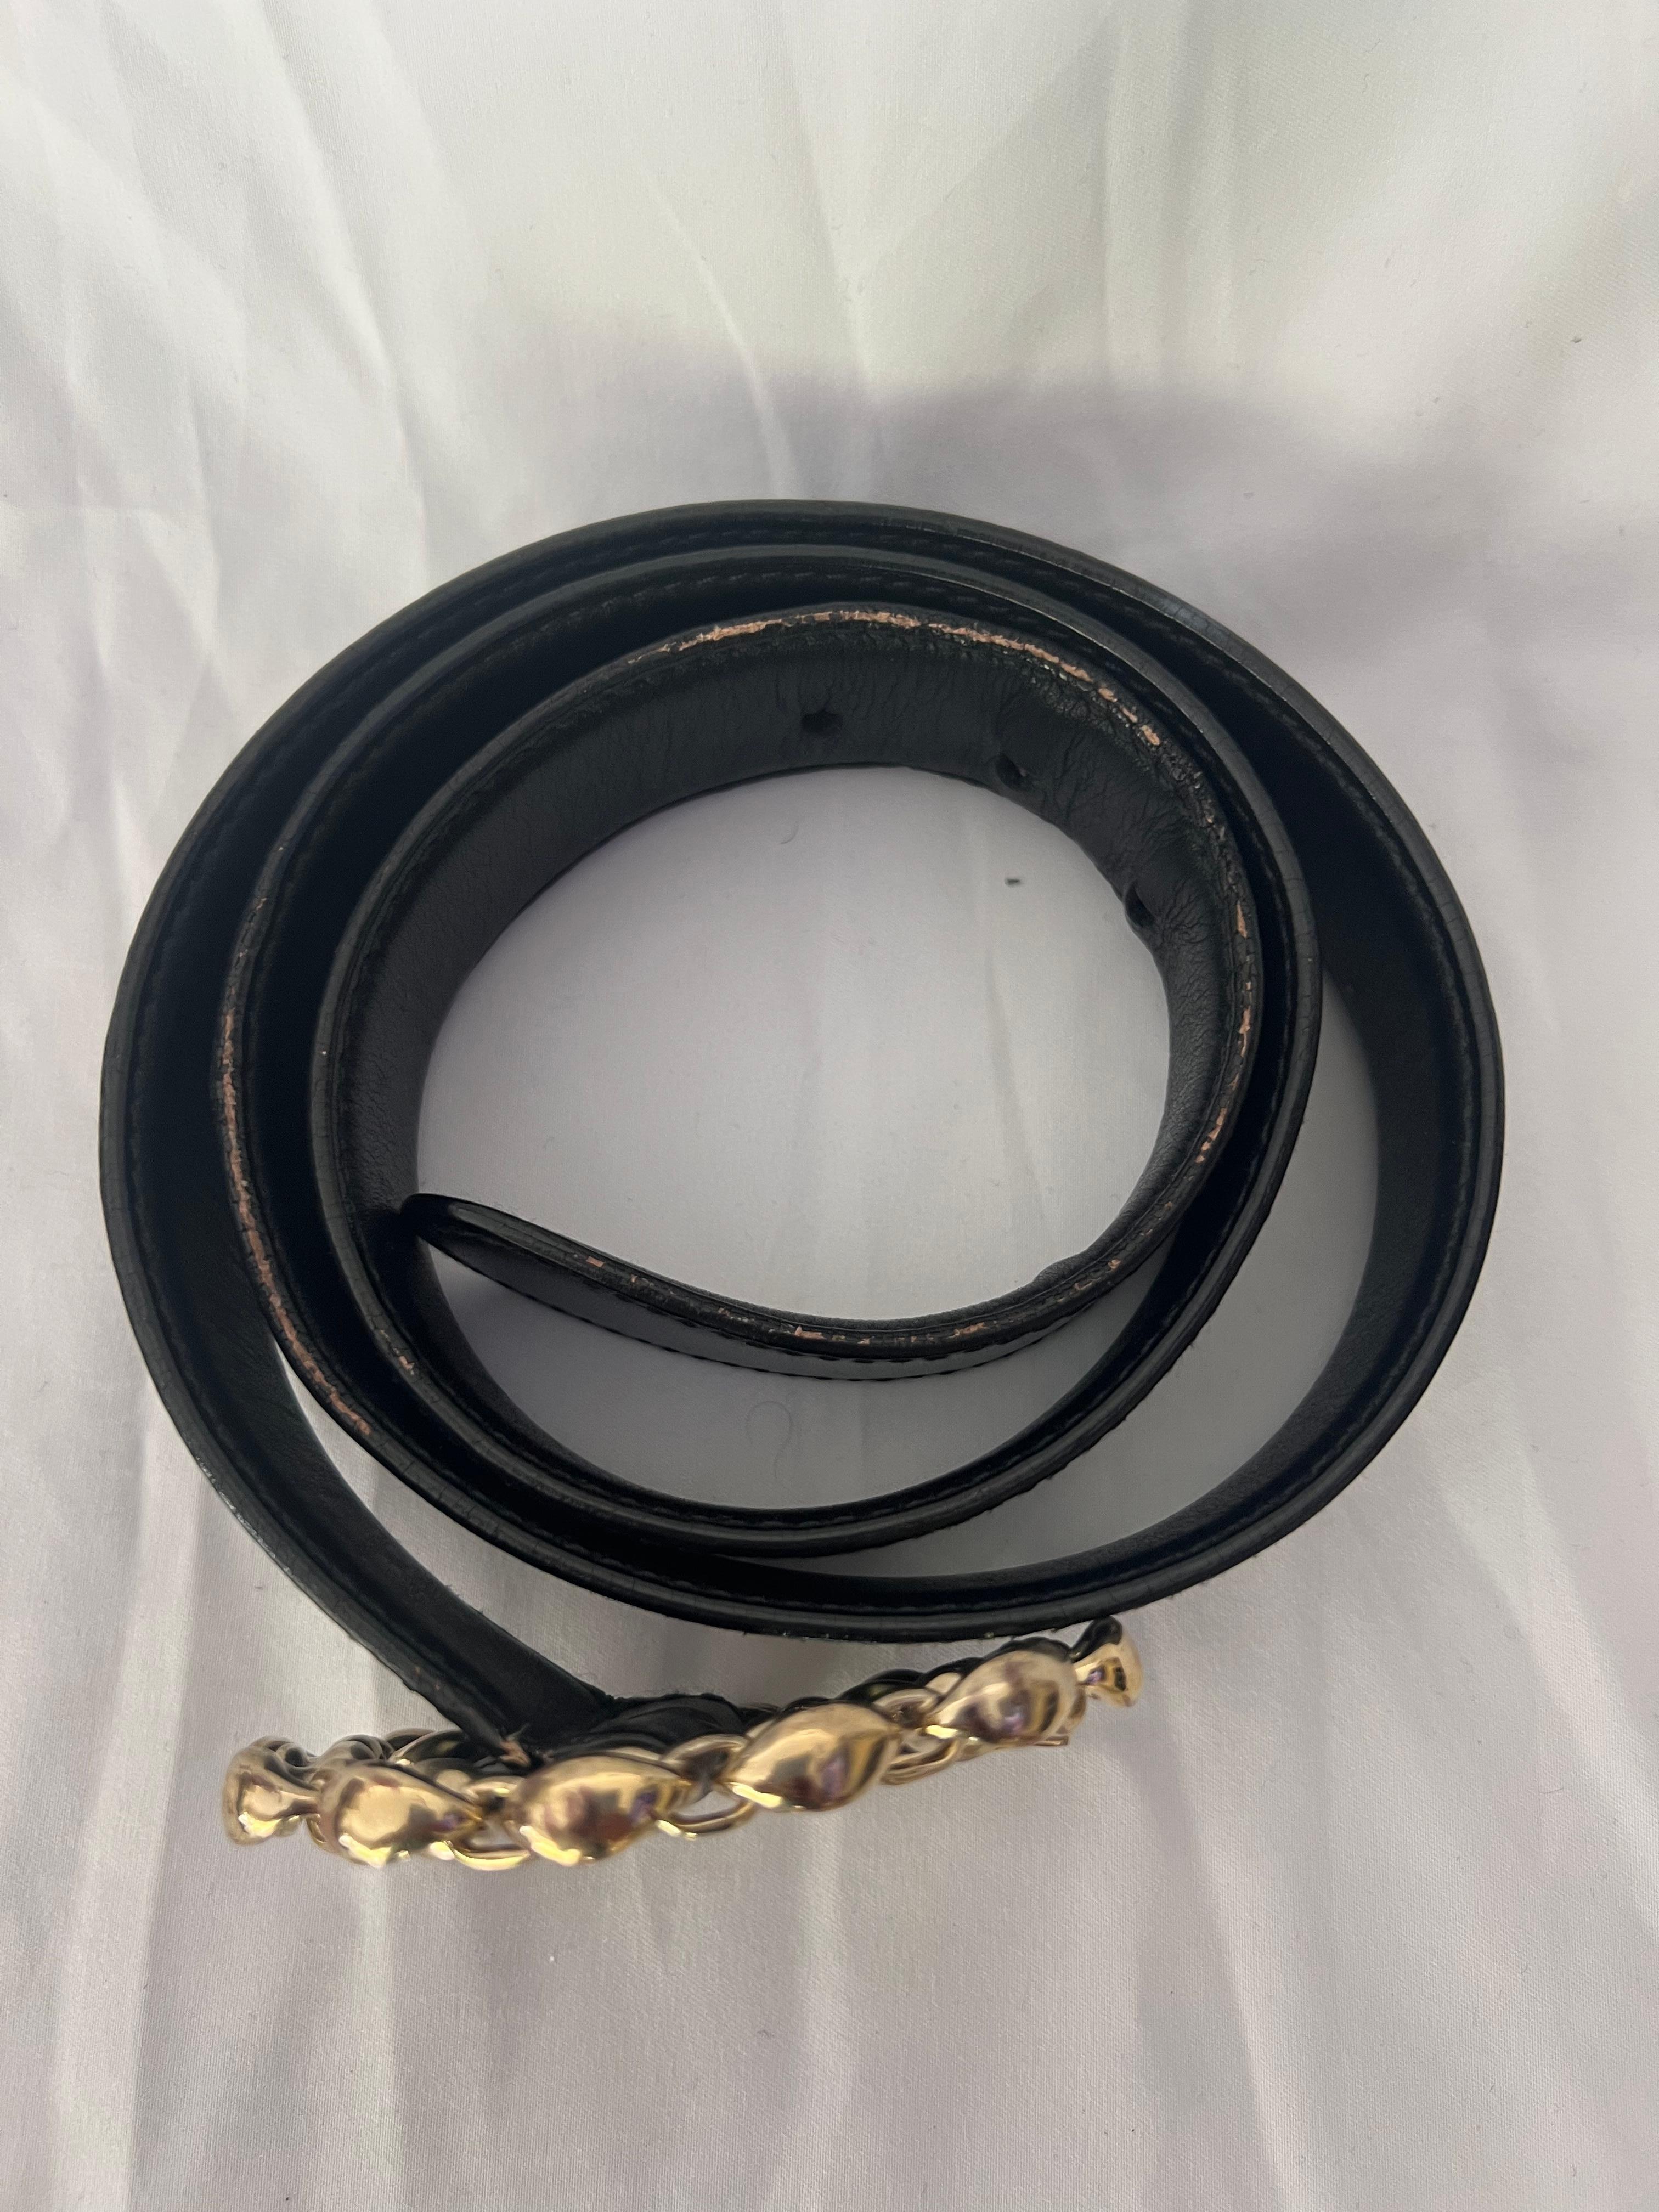 - Gold tone hardware
- Chain link motif
- Featuring mariner link
- Buckle closure, measures 3.25” x 2.5”
- Black leather, measure 42” x 1.25”
- Made in Italy